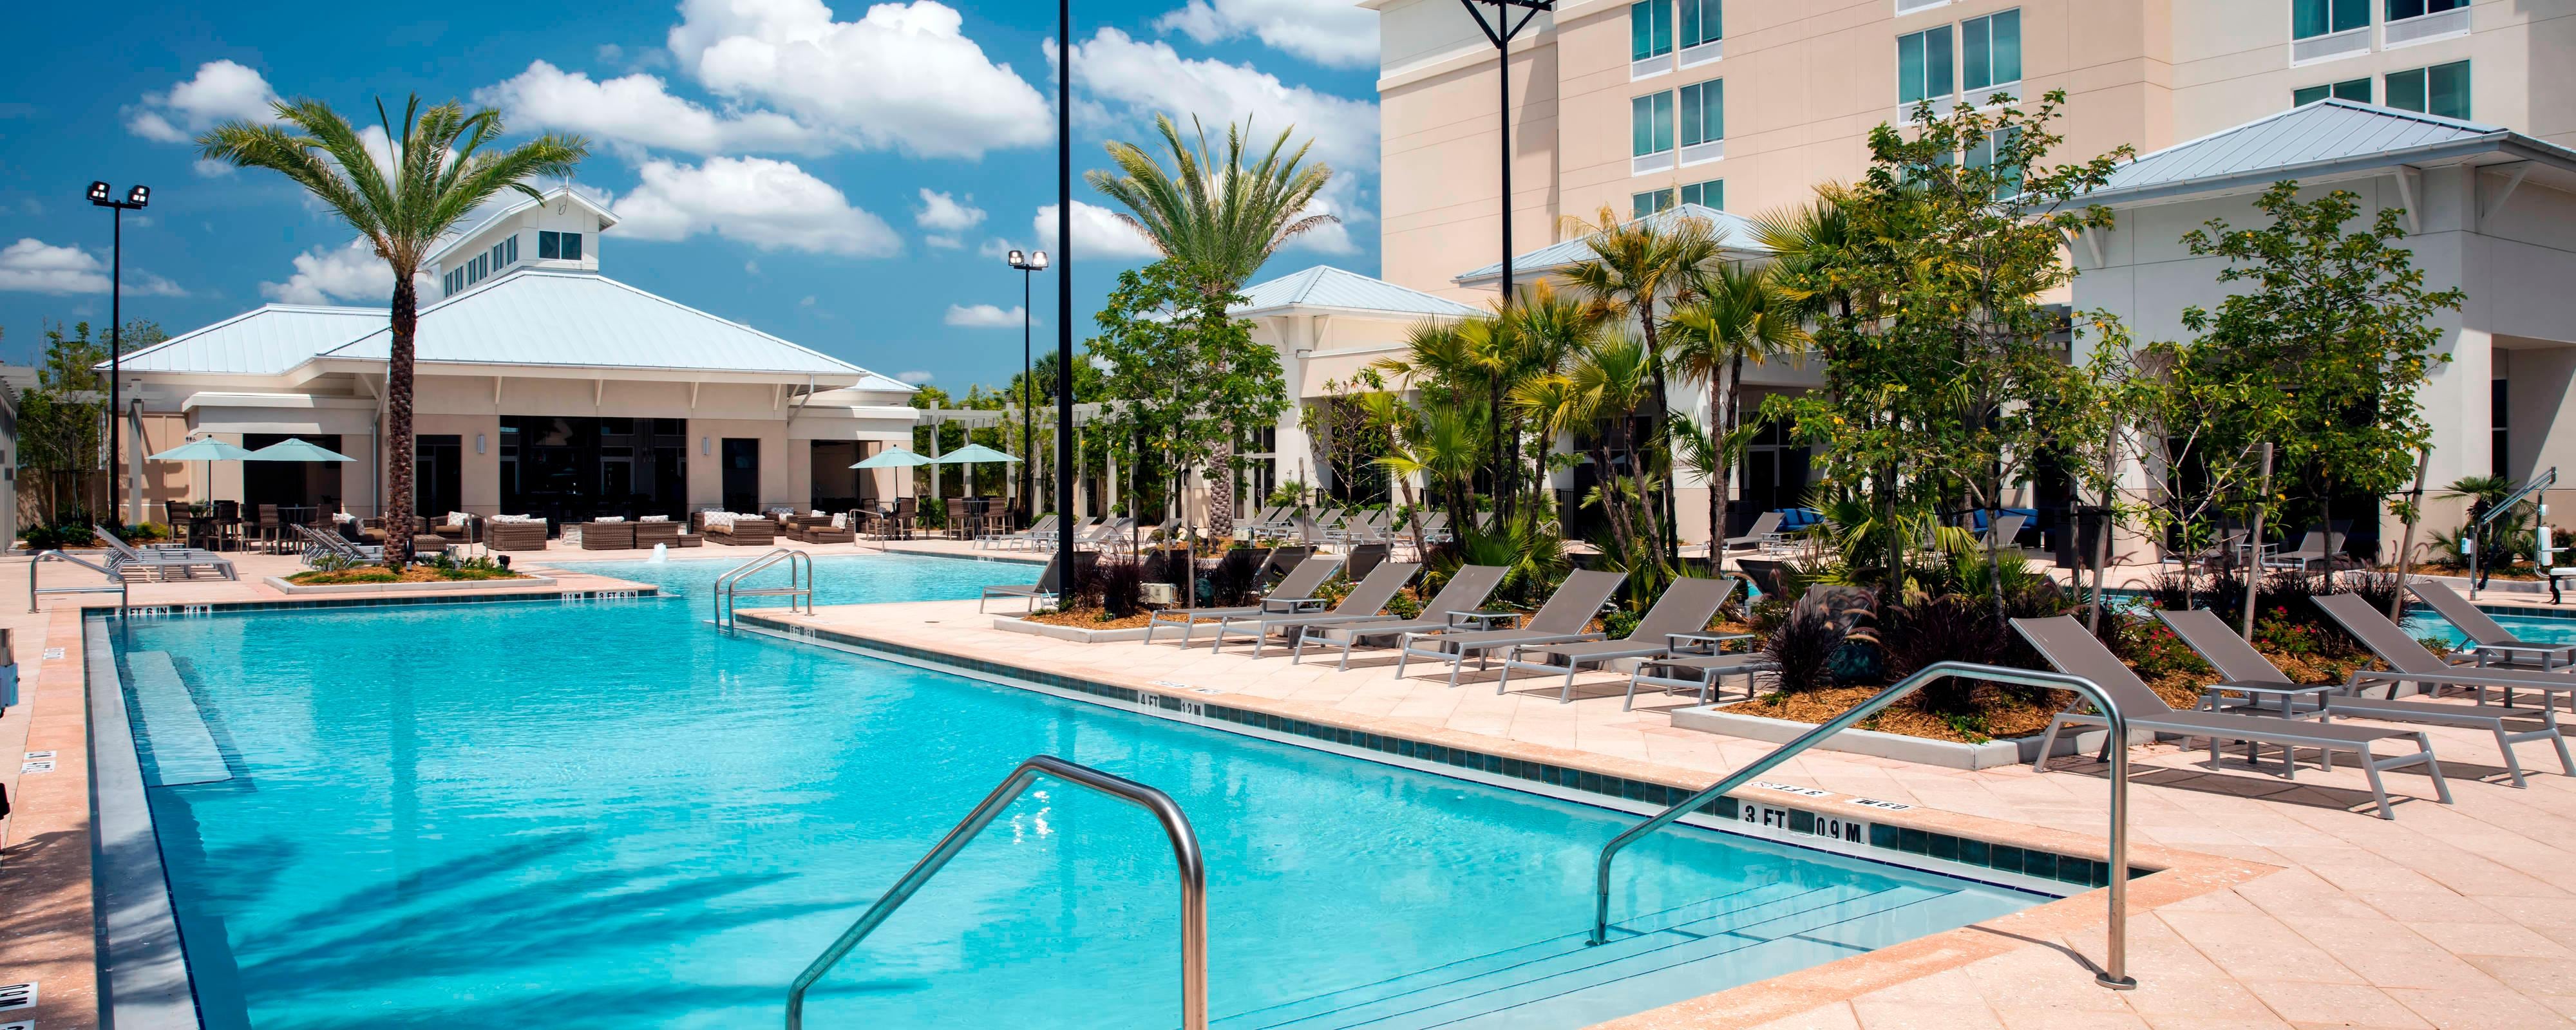 Towneplace Suites Orlando Am Flamingo Crossings Town Center